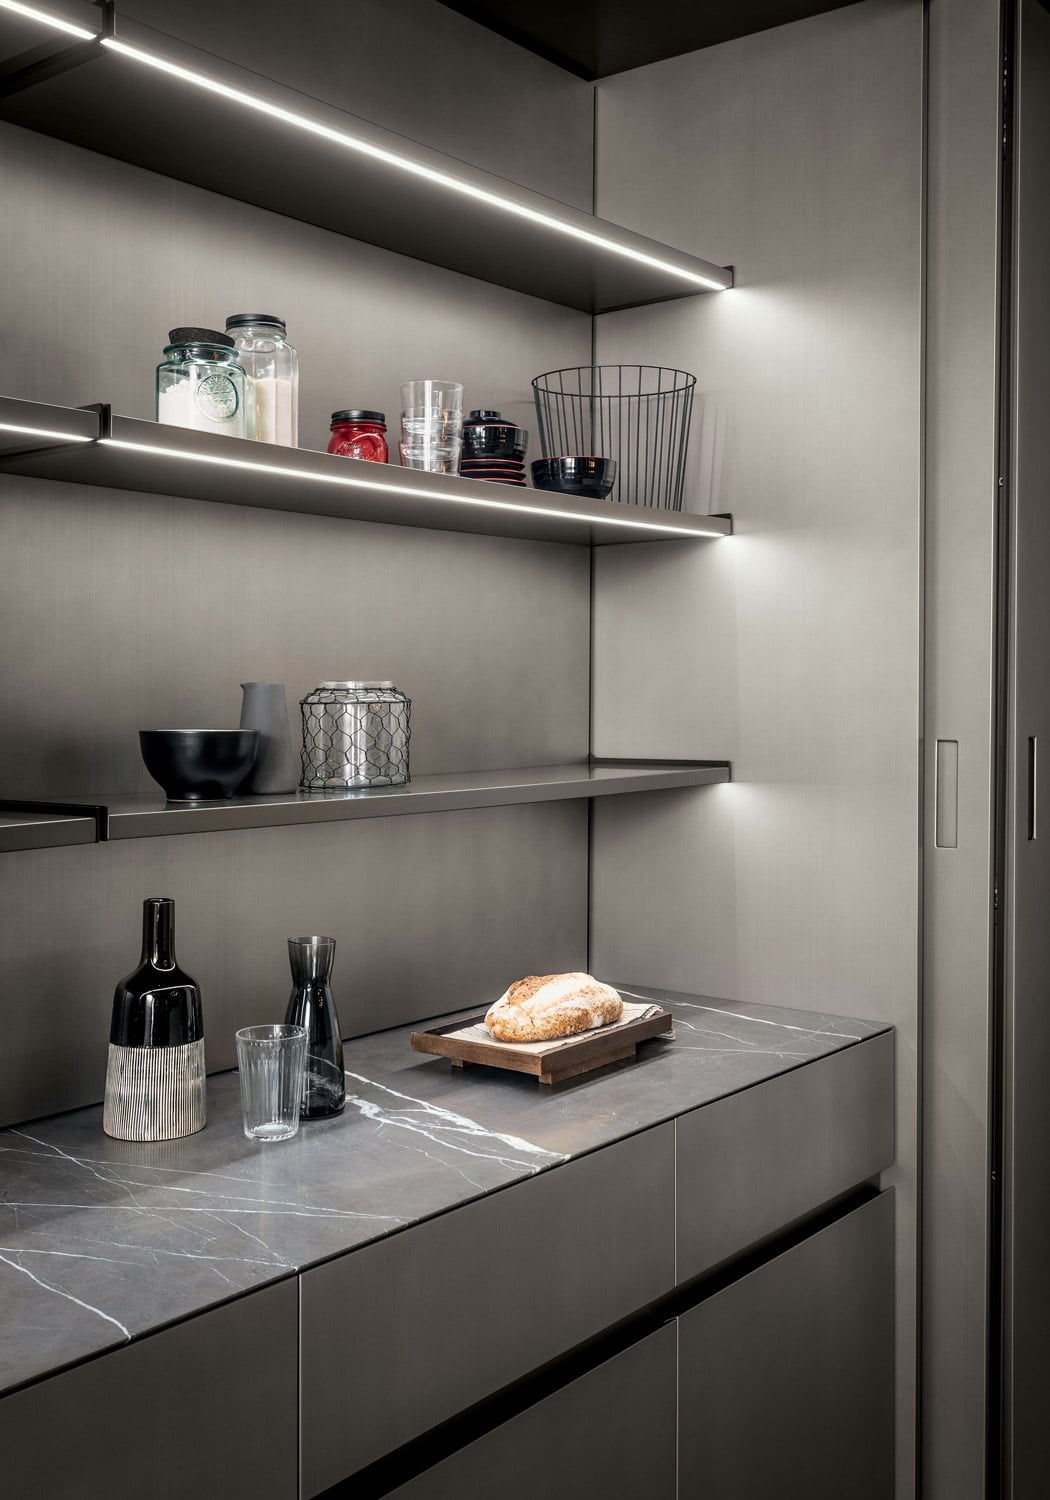 Inside the central section of the tall units, the extra surface features a Pietra Grey marble finish. Under the shelves are LED strips custom fitted towards the front of the shelves. 